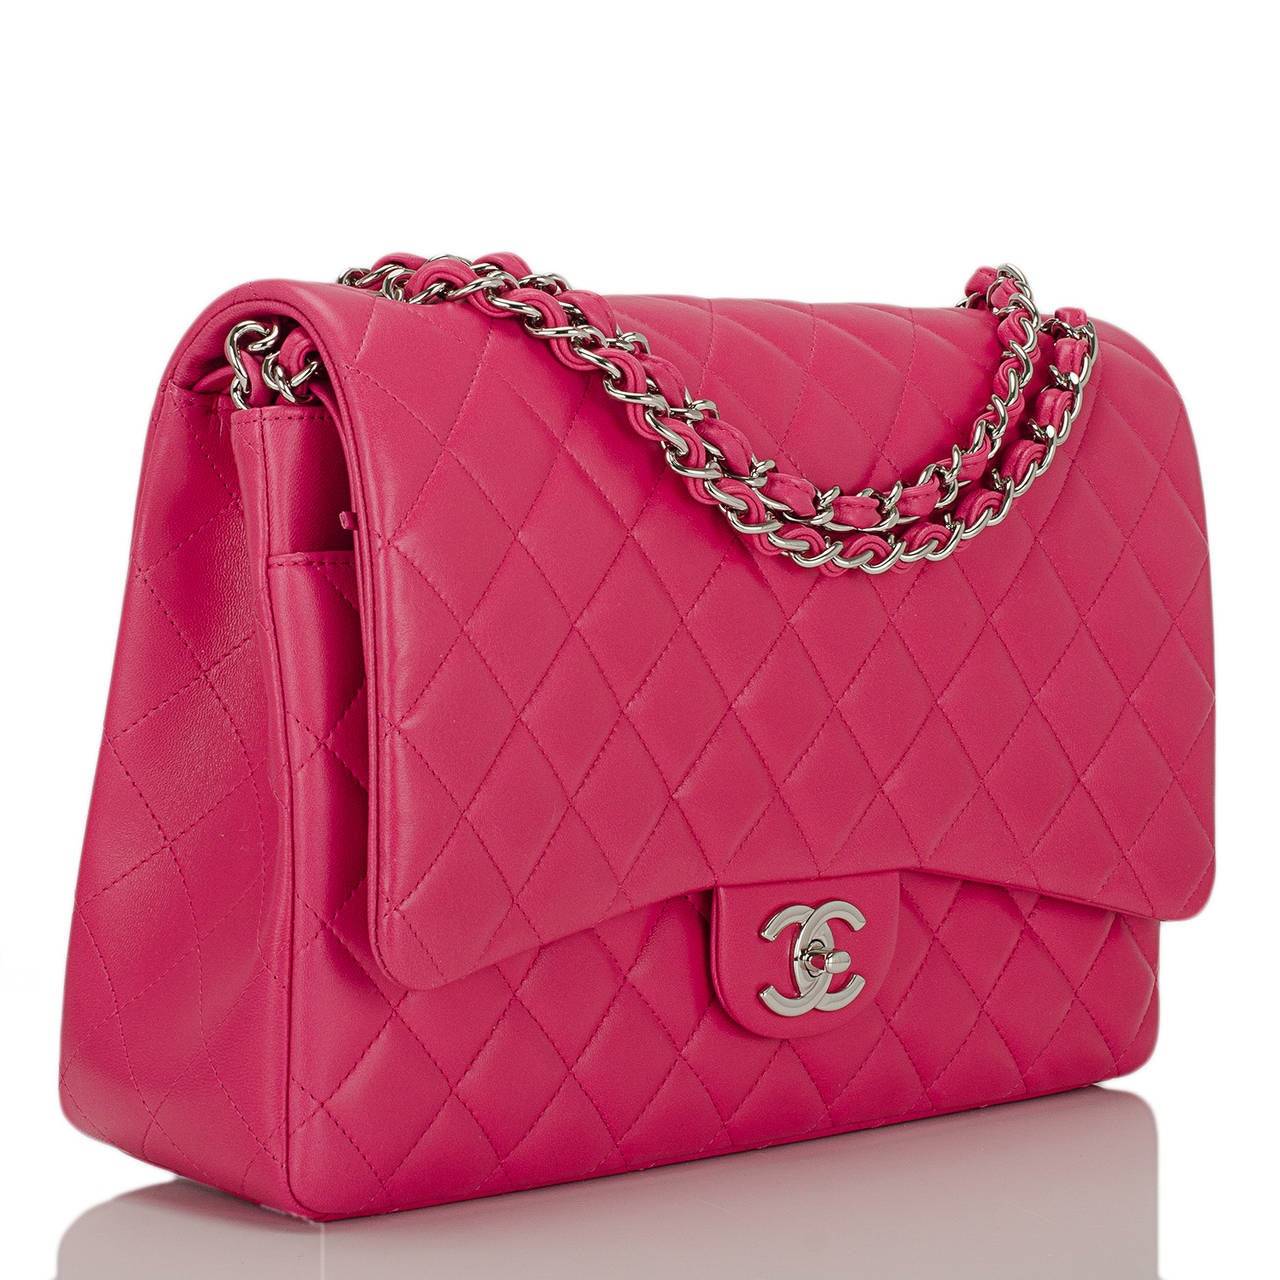 Chanel Maxi Classic double flap in a limited edition fuchsia pink quilted lambskin leather with silver tone hardware and featuring a front flap with signature CC turnlock closure, a half moon back pocket, and an adjustable interwoven silver tone